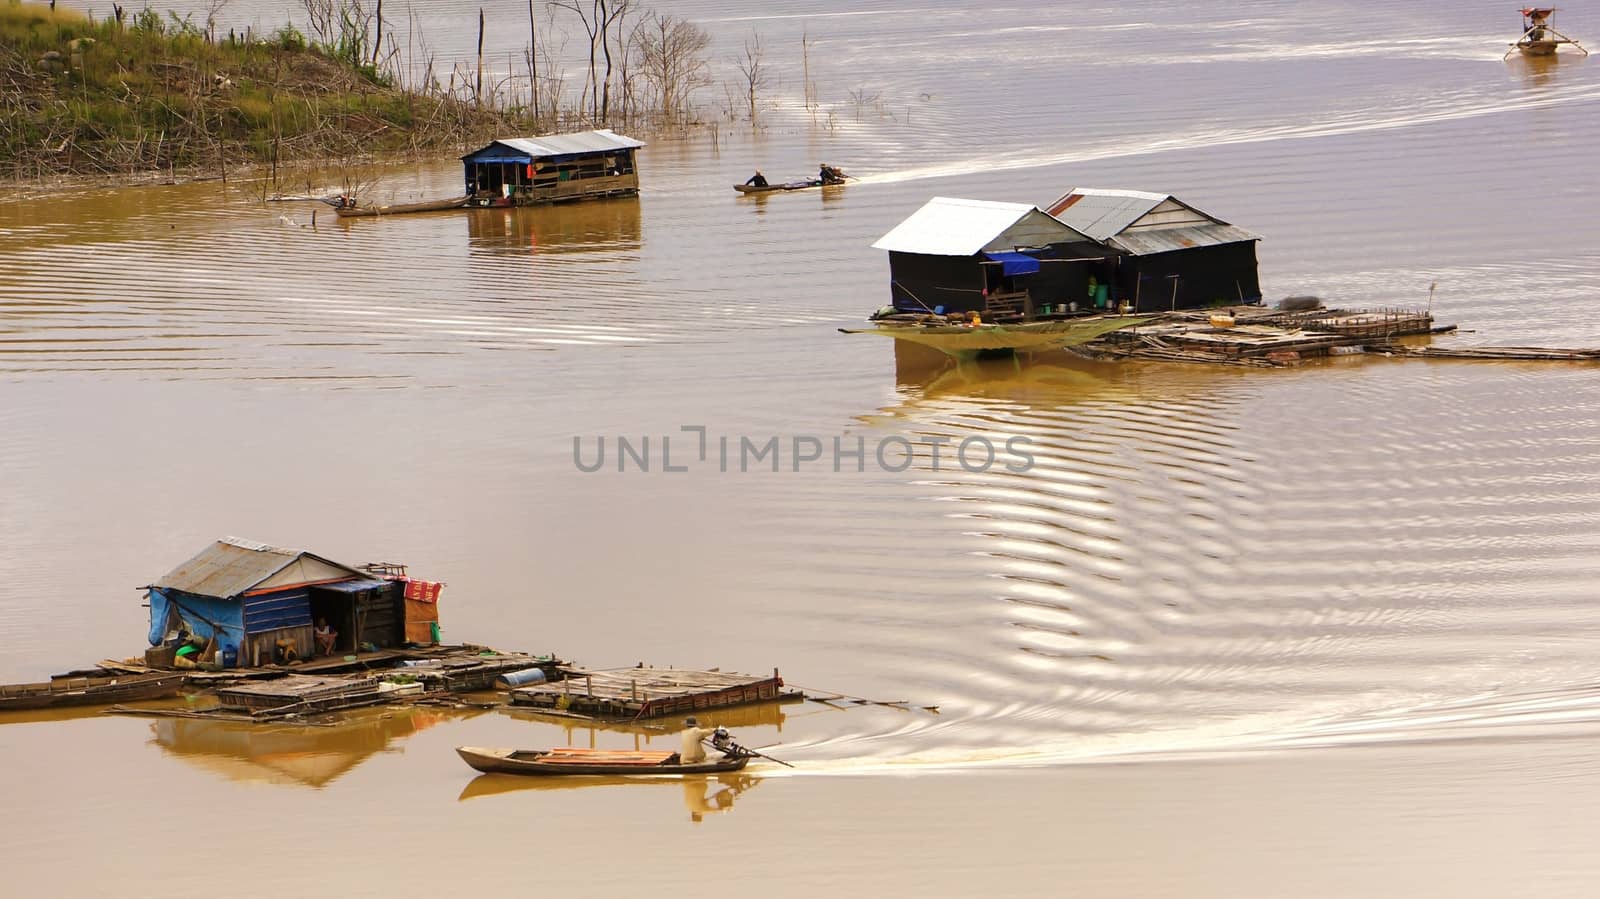  the scene of fisherman coming their lake dwelling by motor-boat at fishing village create ripplings on the water suface is so lively. This fishing village locate at NamKa lake, Dalak.